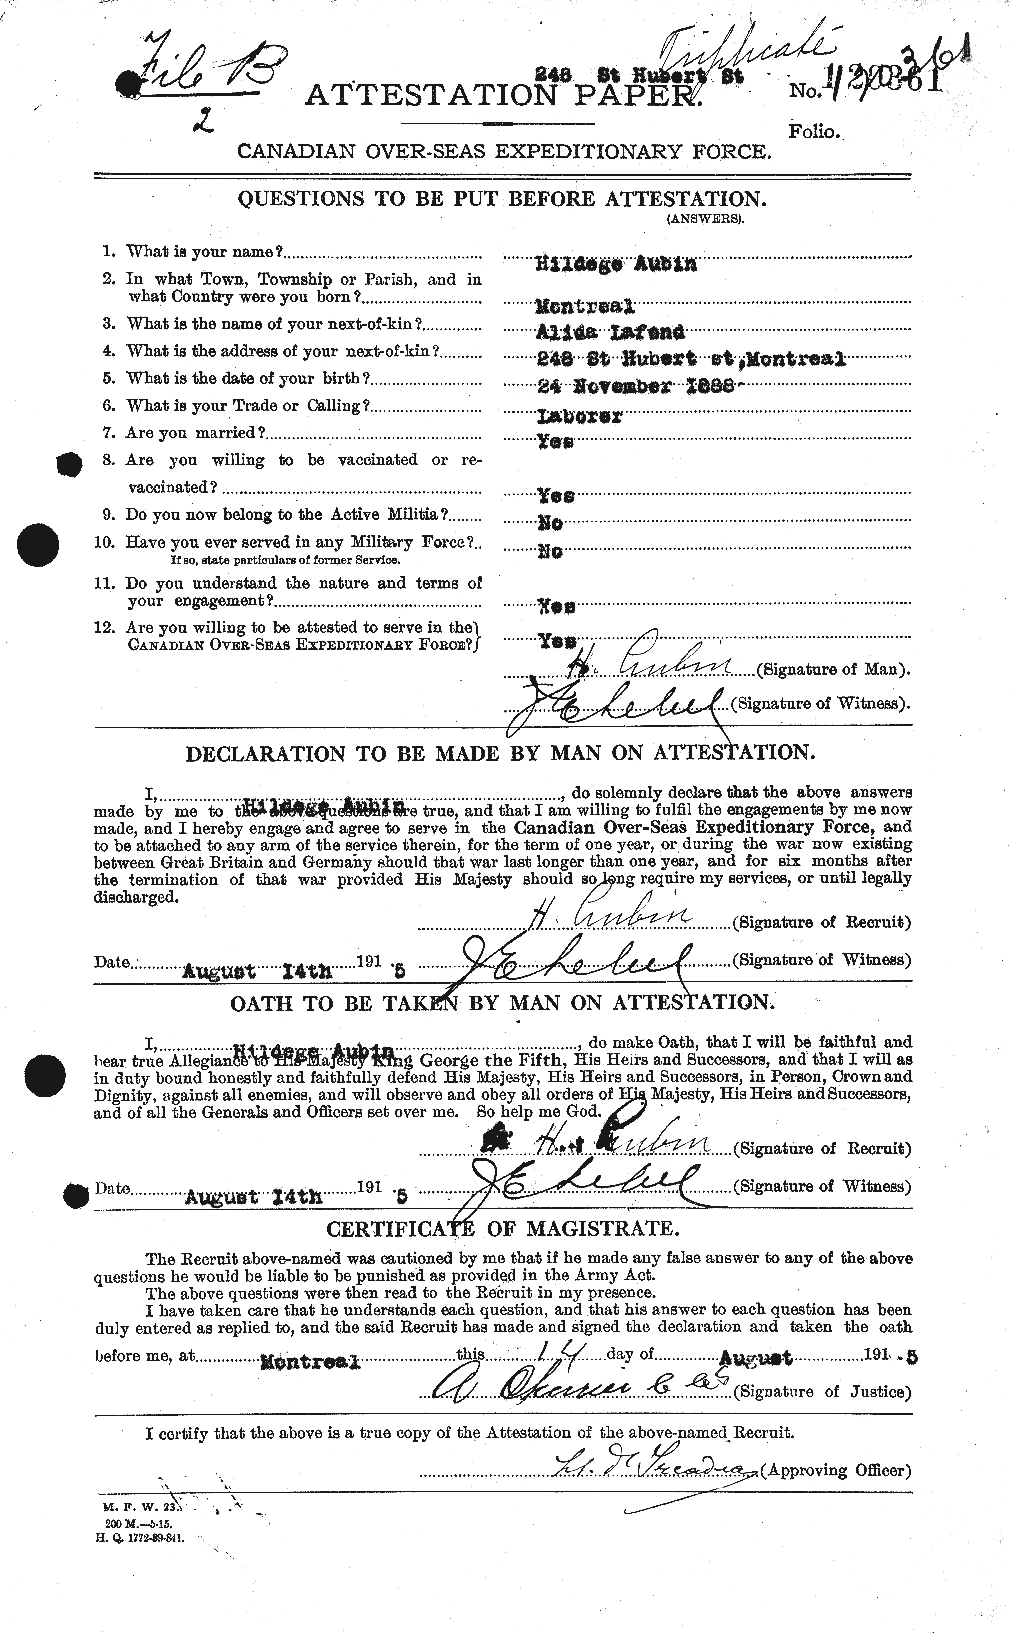 Personnel Records of the First World War - CEF 223866a